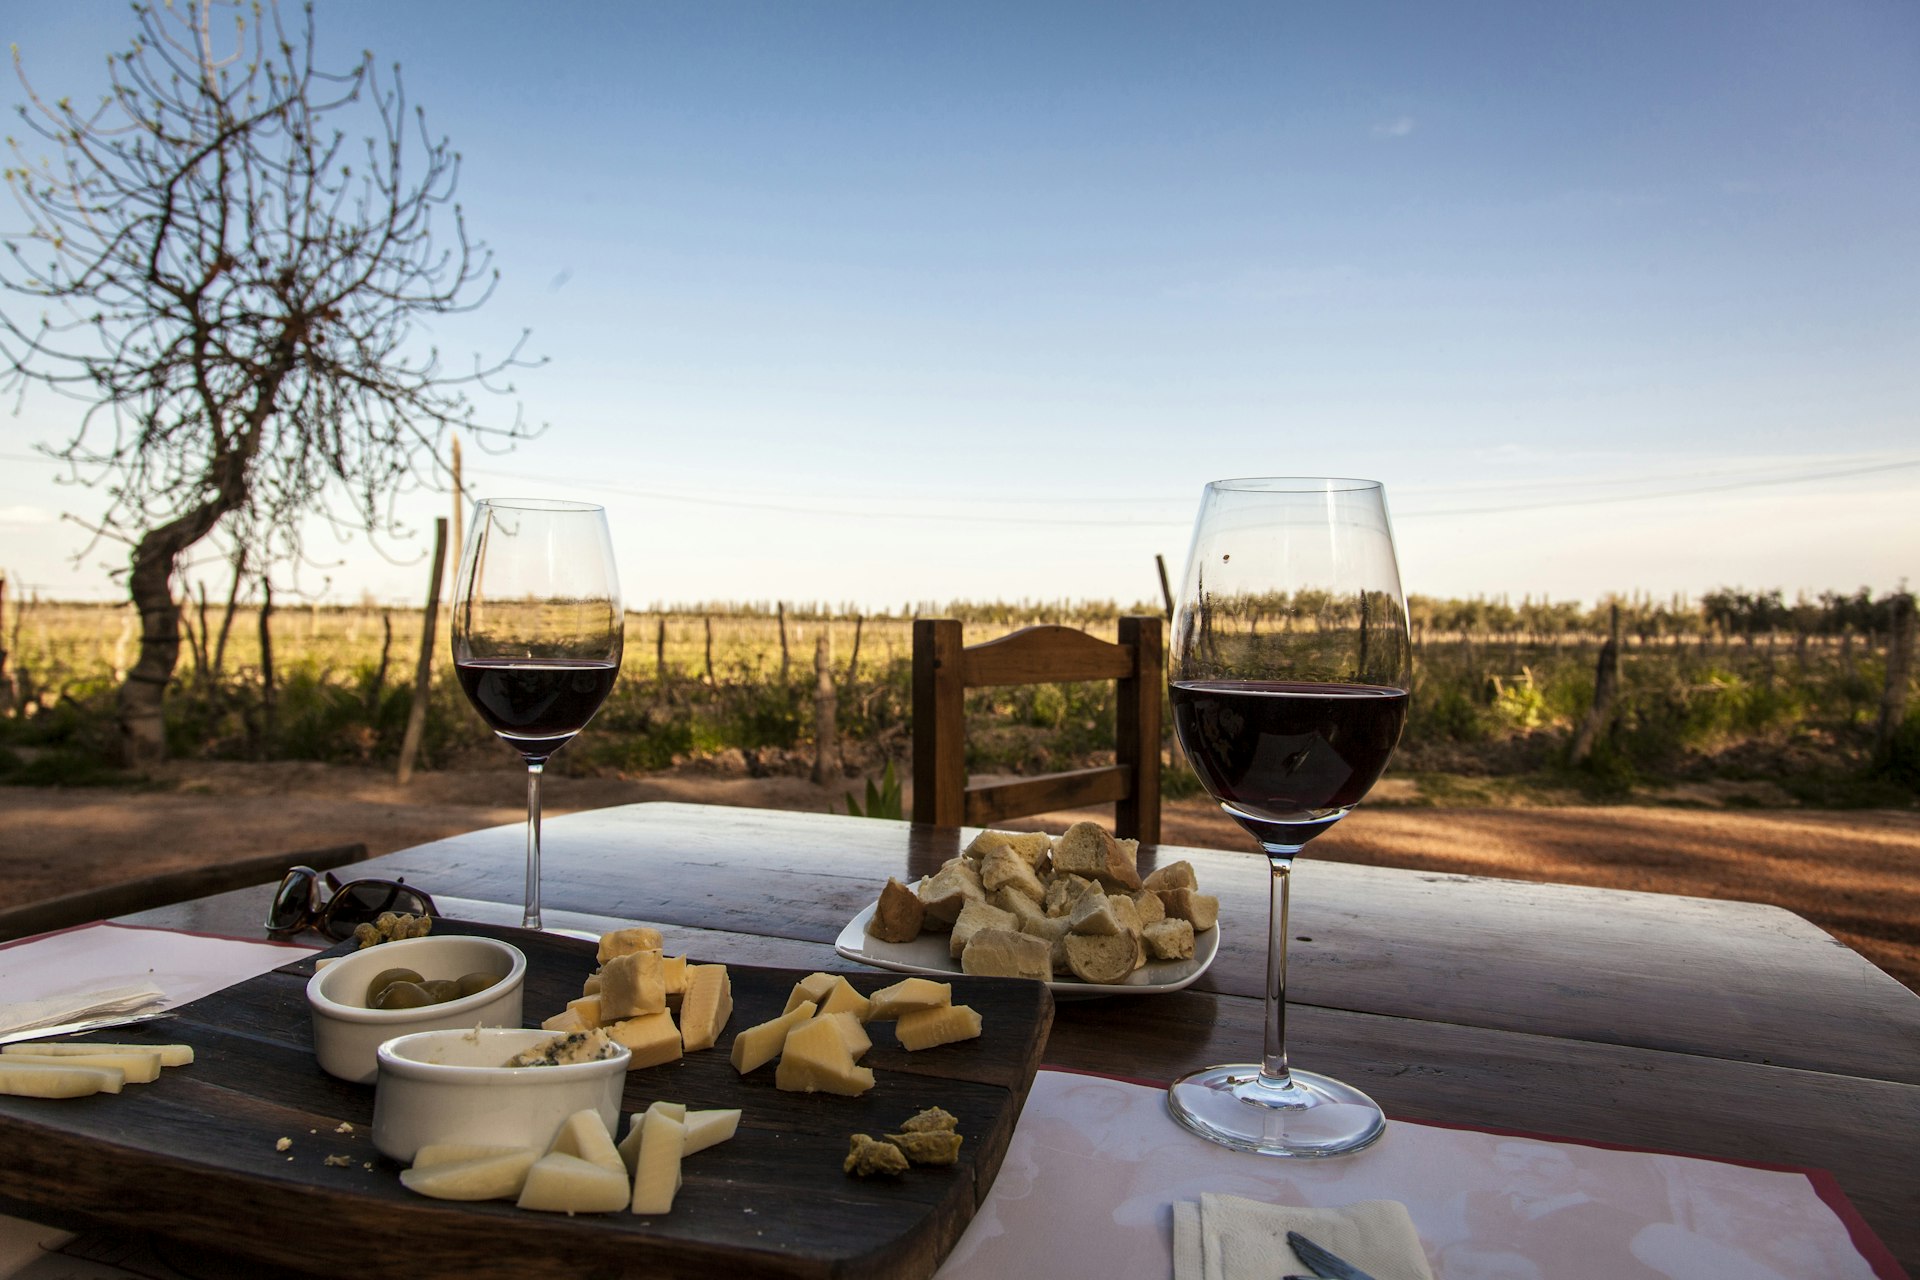 A platter of cheese and two glasses of red wine at a rustic outdoor table in Mendoza, Argentina, South America